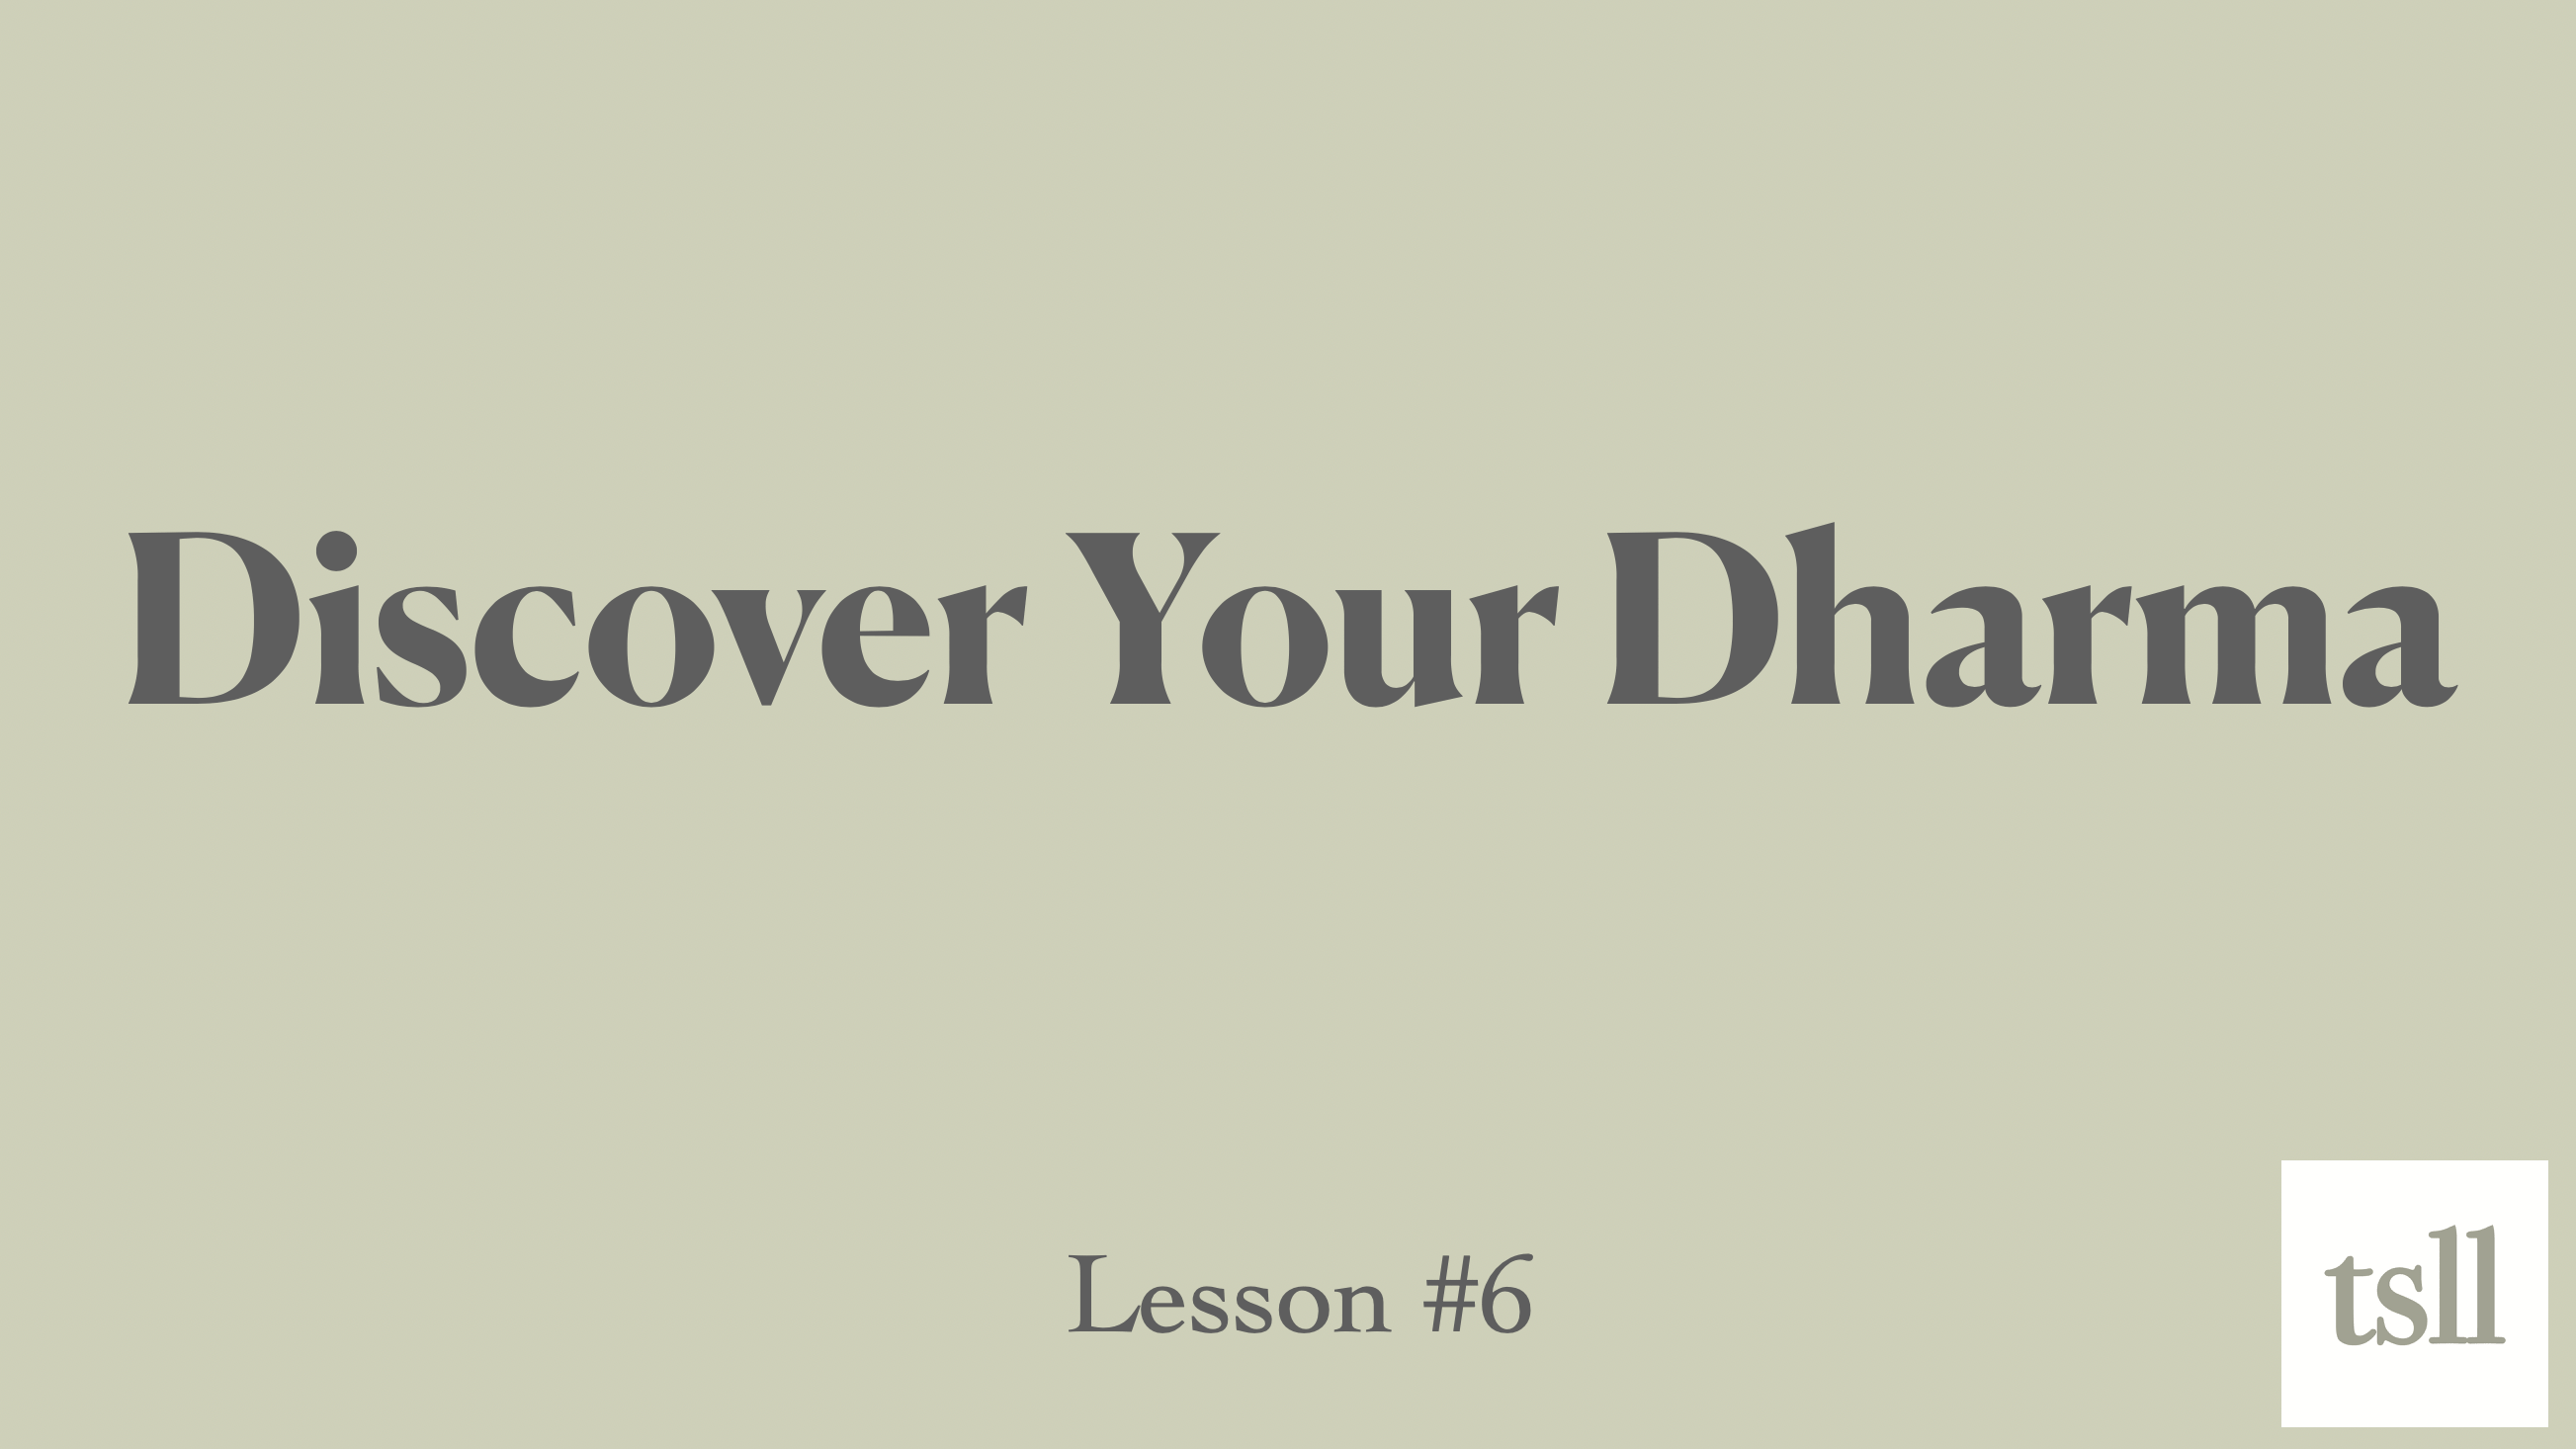 Part 5: Discover Your Dharma (45:01)